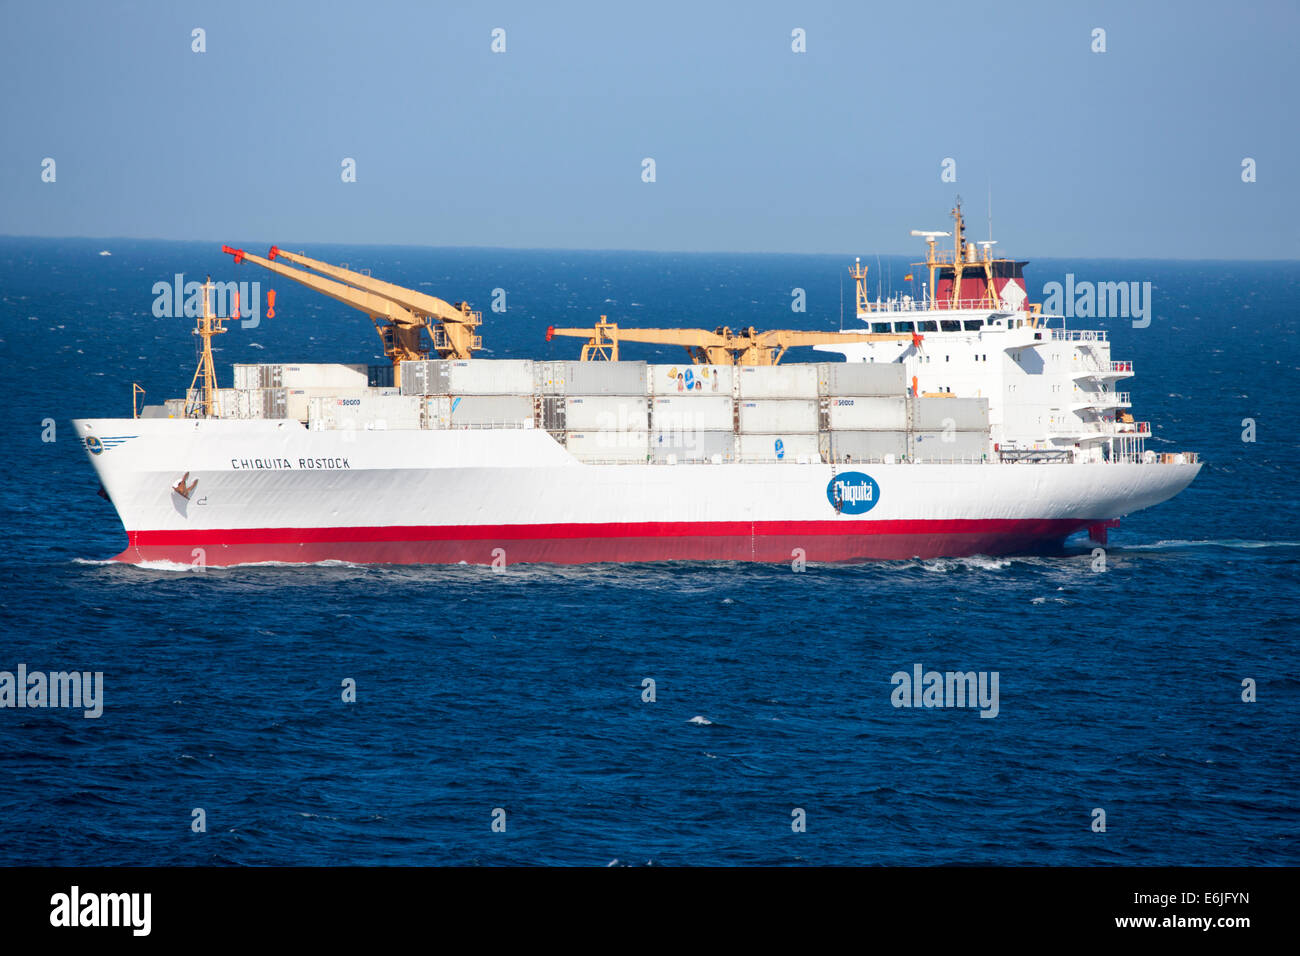 Ship Chiquita Rostock Refrigerated Cargo Ship Reefer in the port of Gibraltar in the Mediterranean Sea Stock Photo